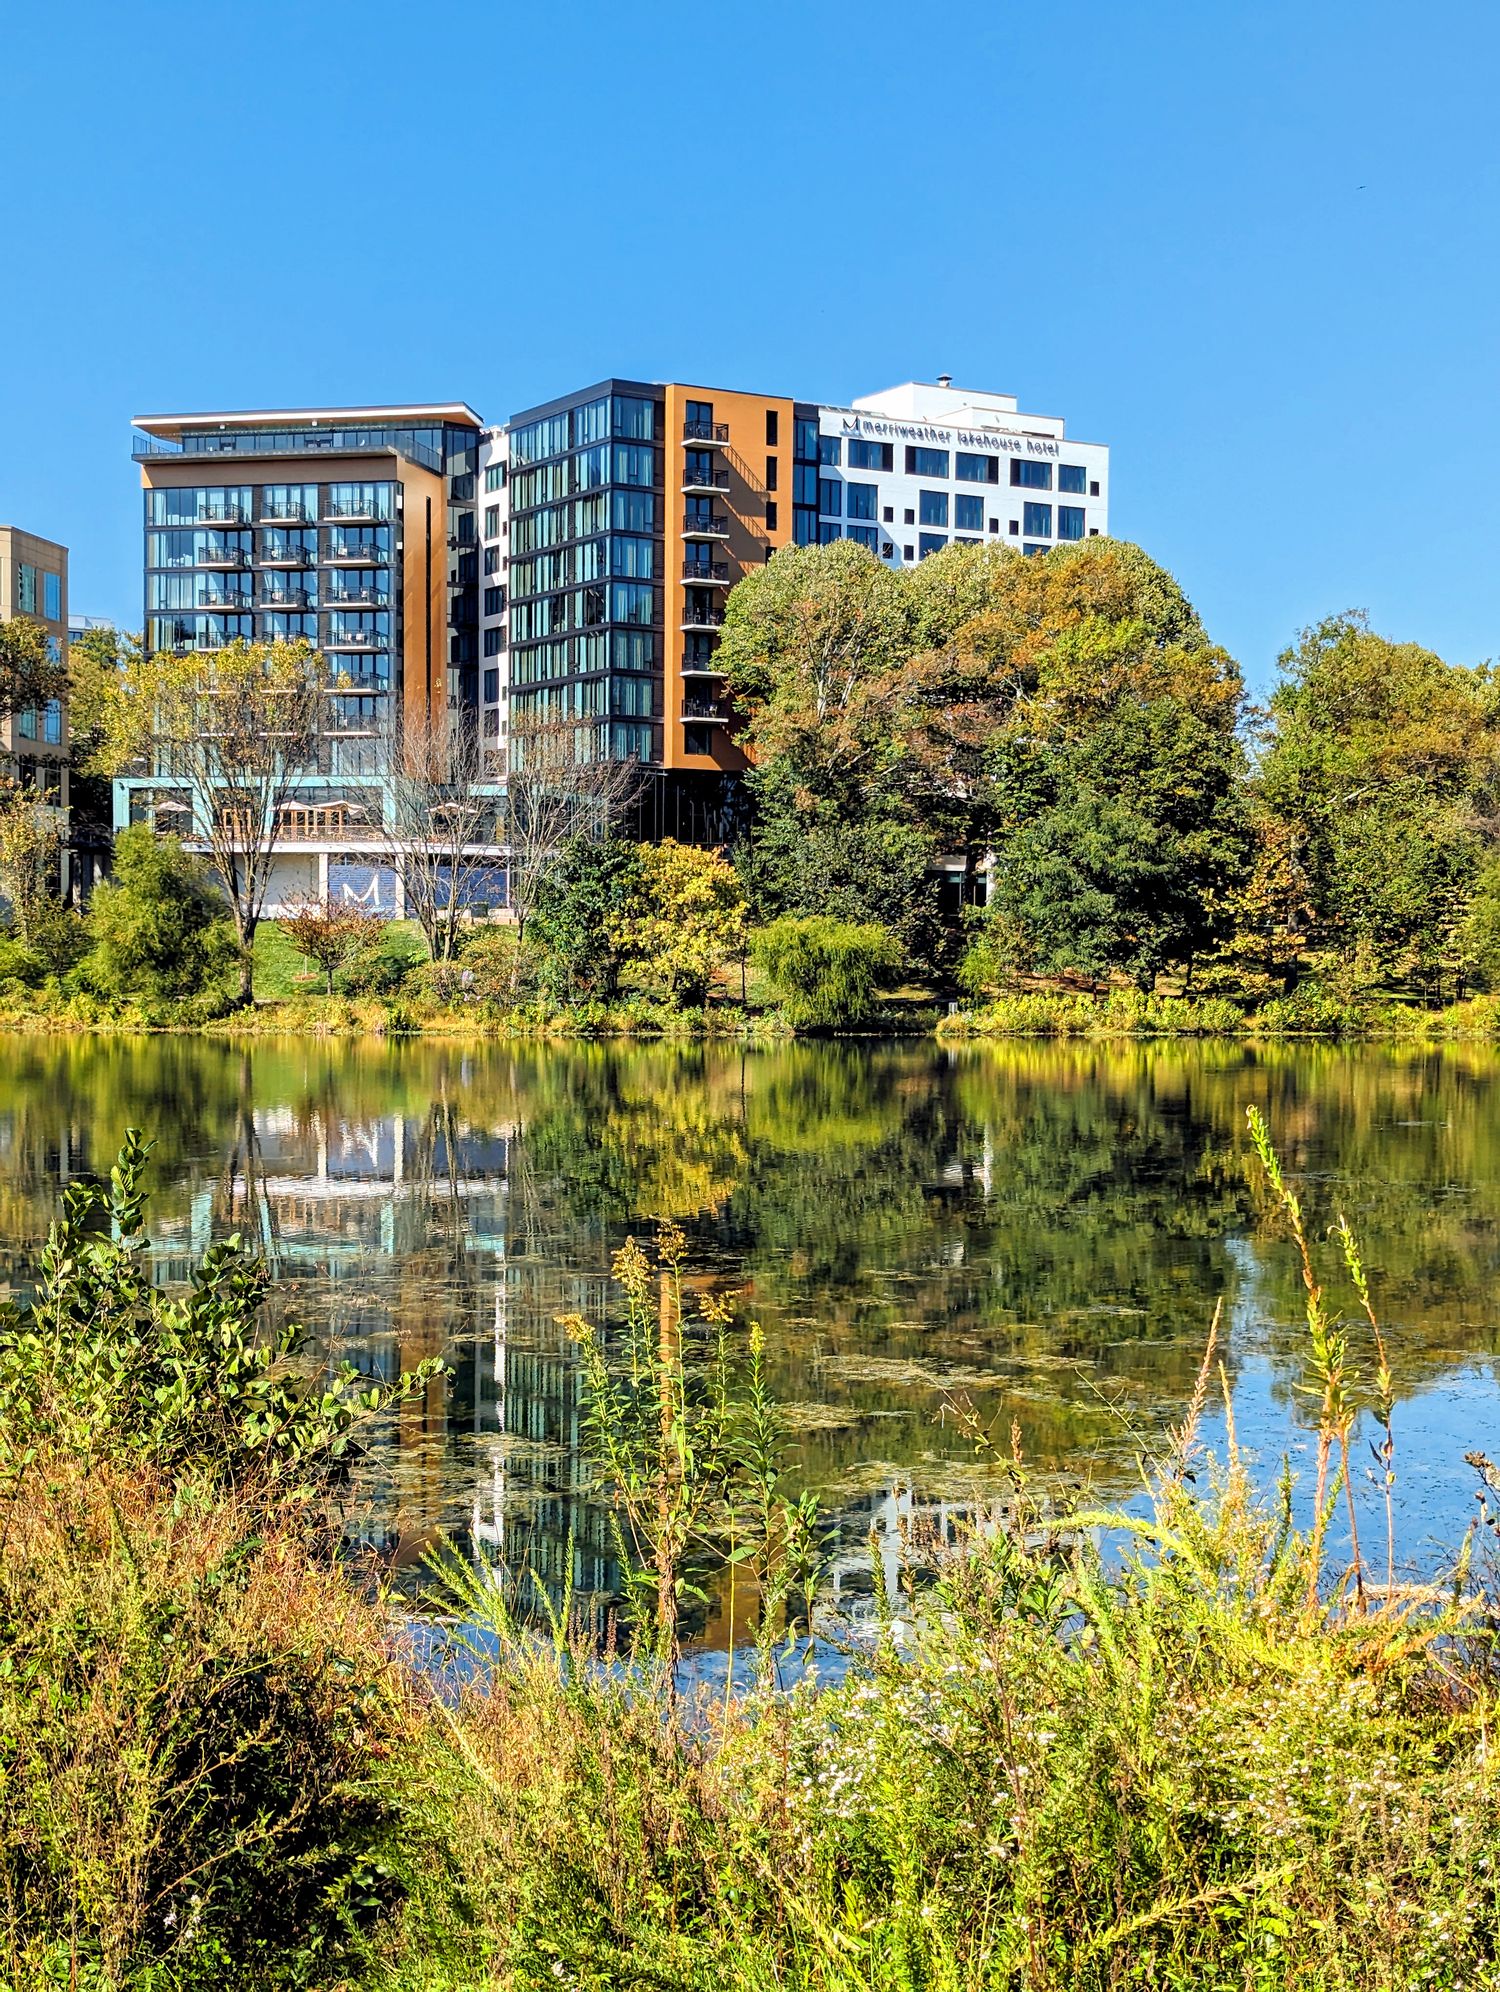 The view of The Merriweather Lakehouse Hotel in Columbia, Maryland from the other side of the lake. 